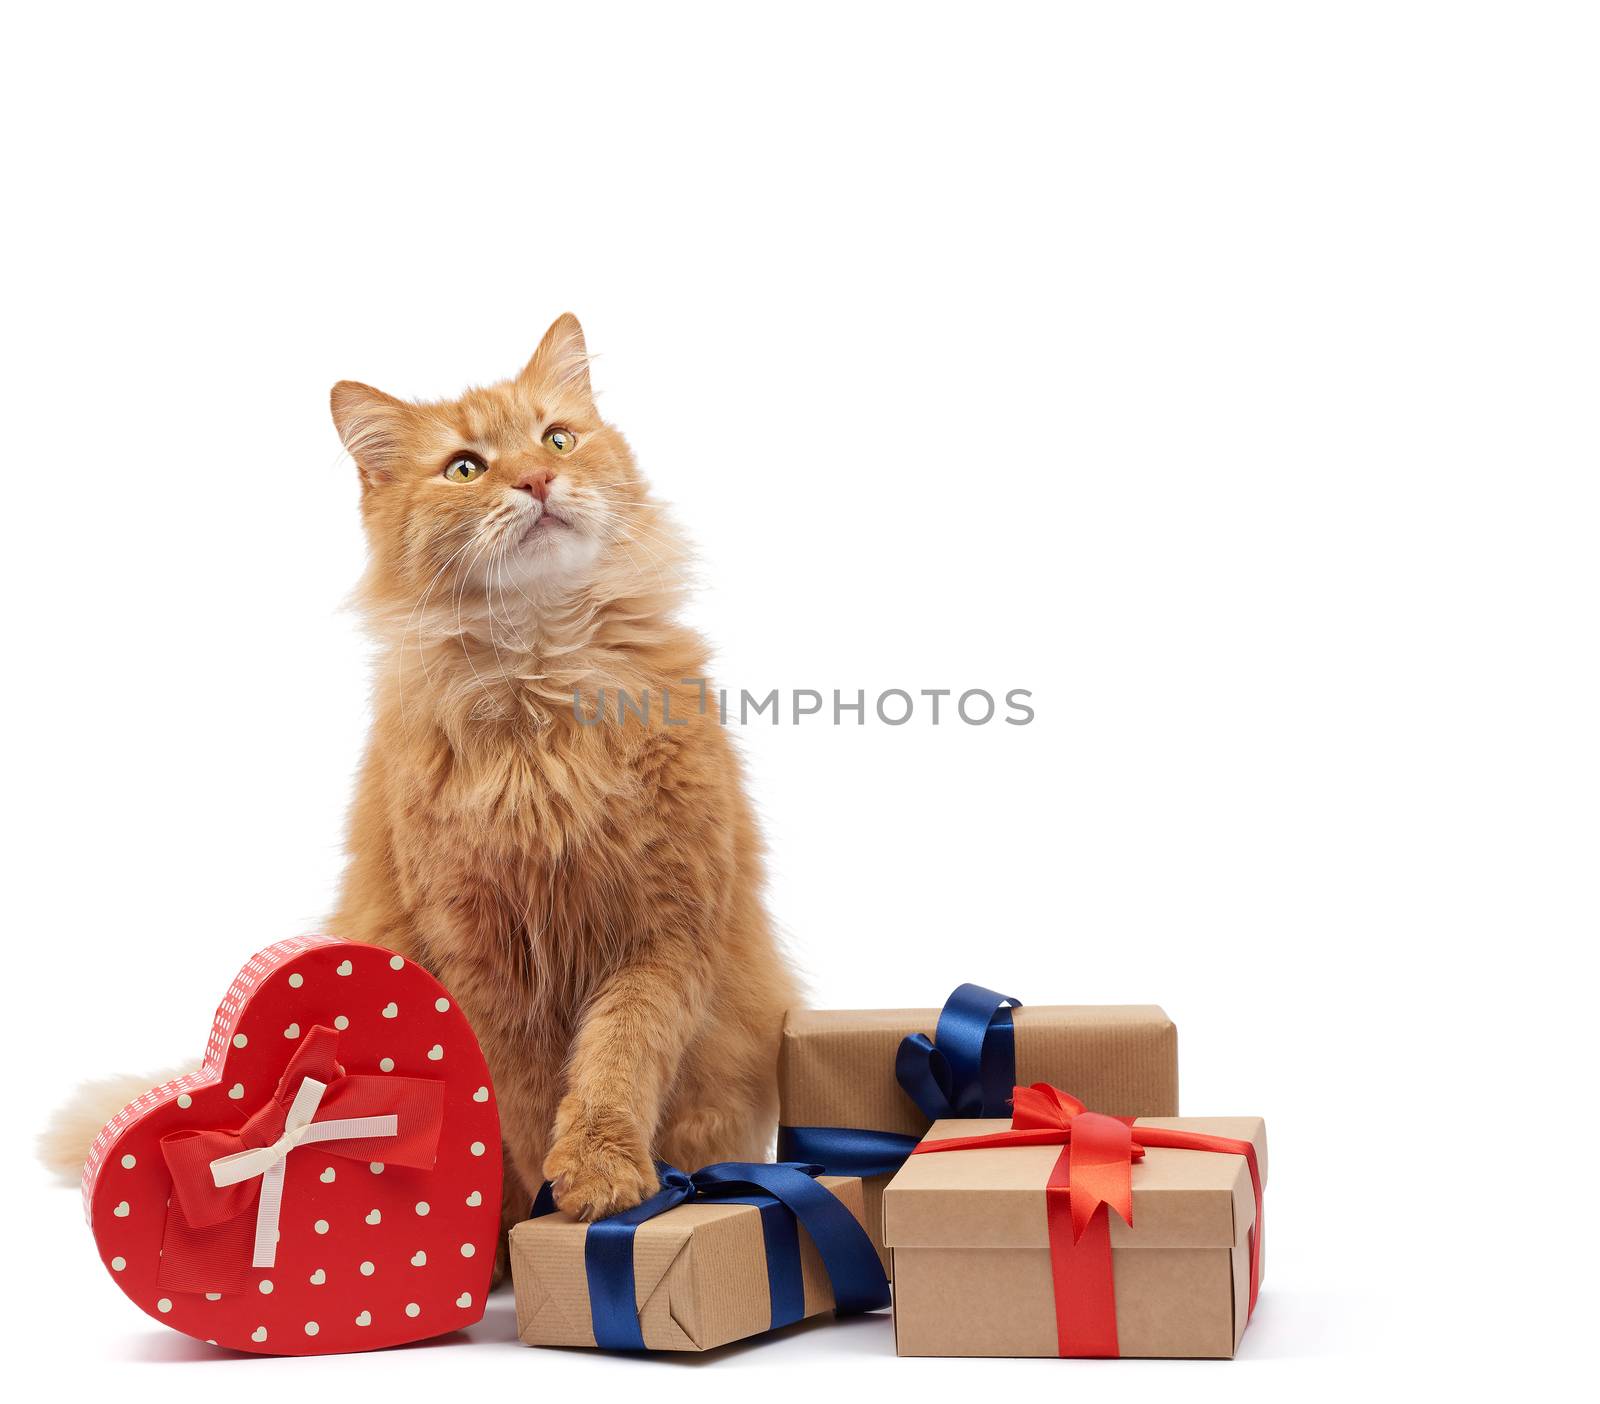 funny adult ginger cat sitting in the middle of boxes wrapped in brown paper and tied with silk ribbon, gifts and an animal on a white background, birthday greeting card, valentines day